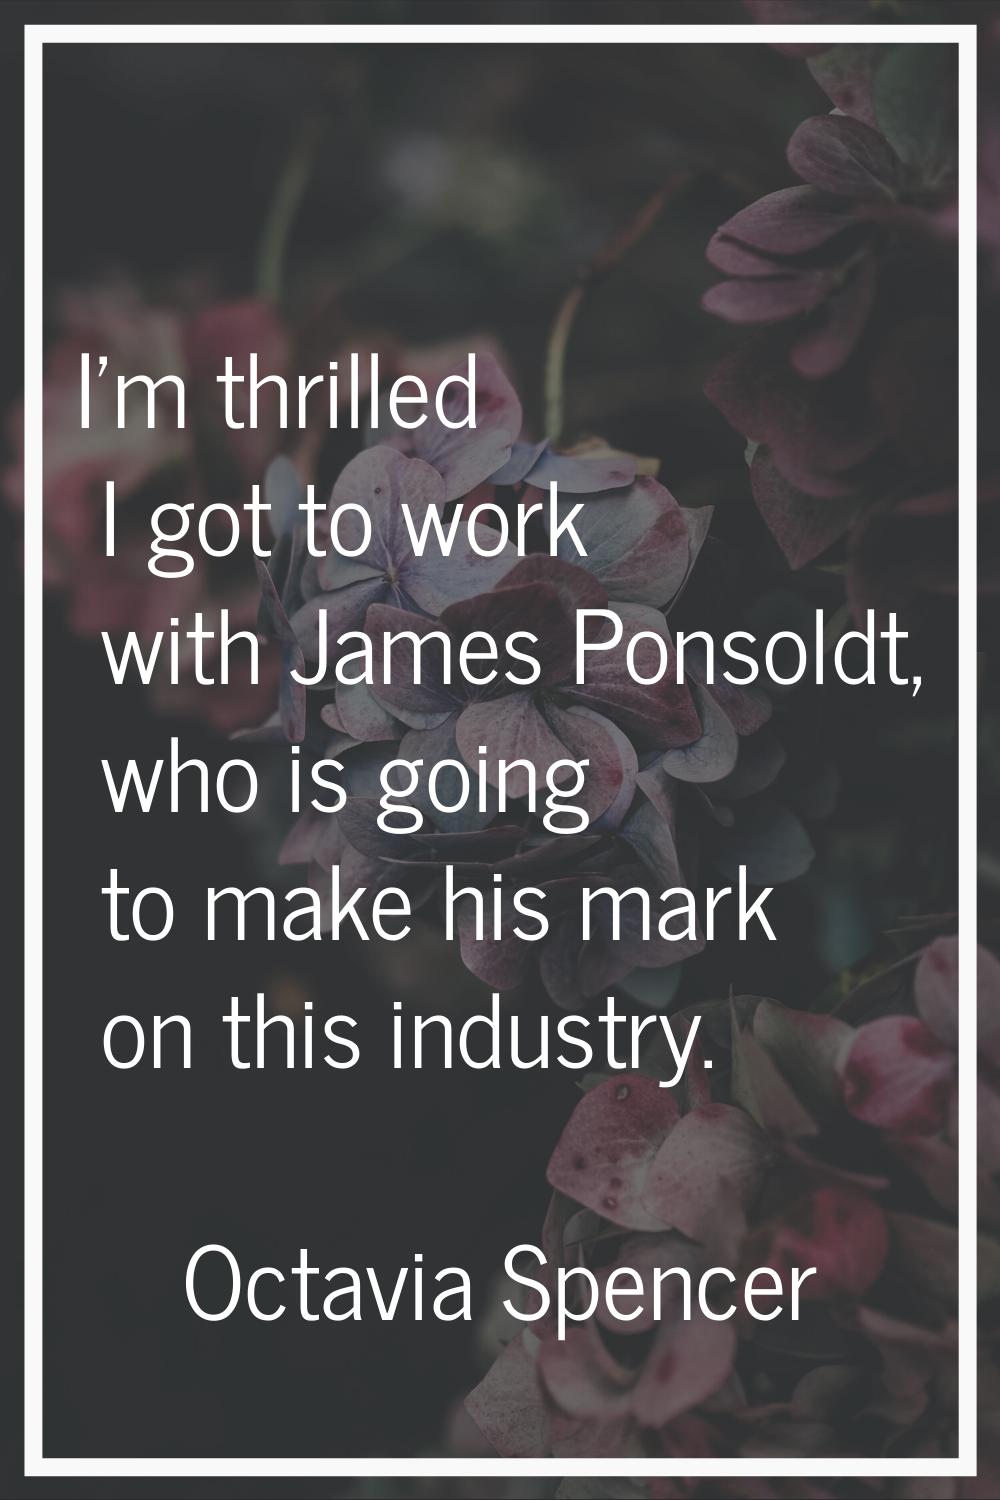 I'm thrilled I got to work with James Ponsoldt, who is going to make his mark on this industry.